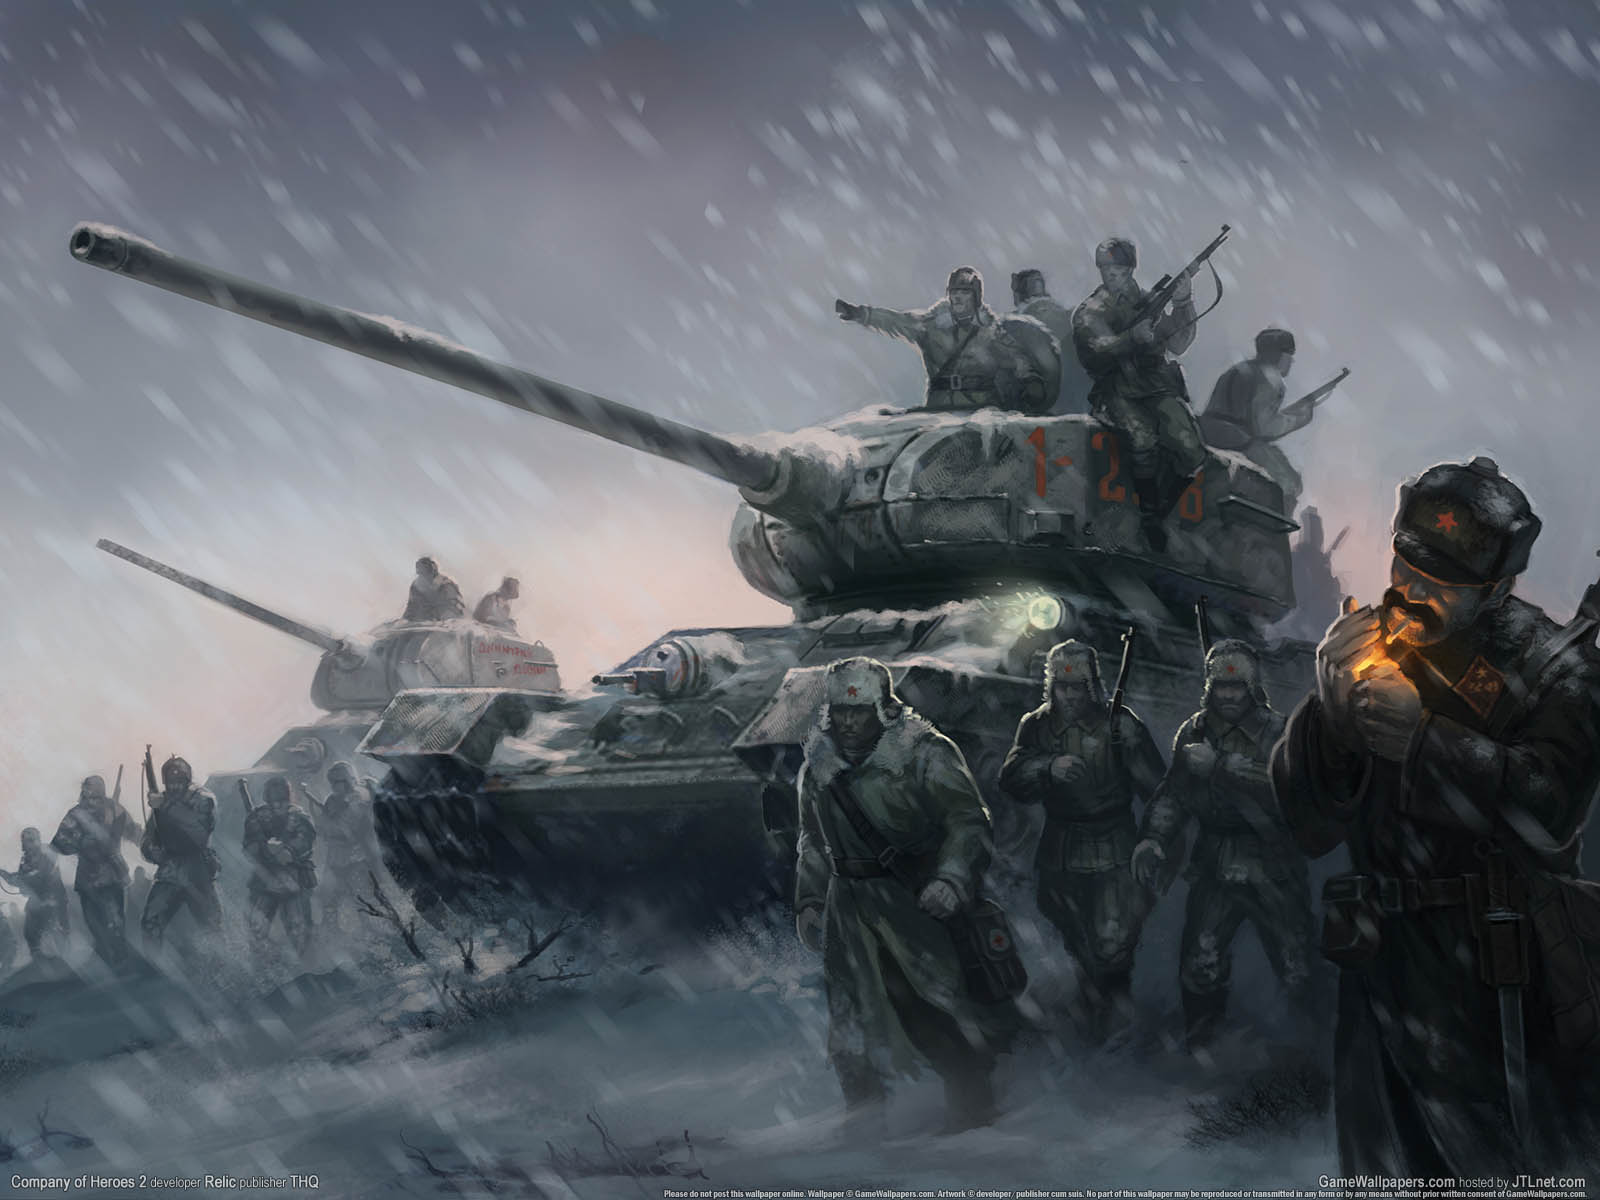 Company of Heroes 2 achtergrond 01 1600x1200